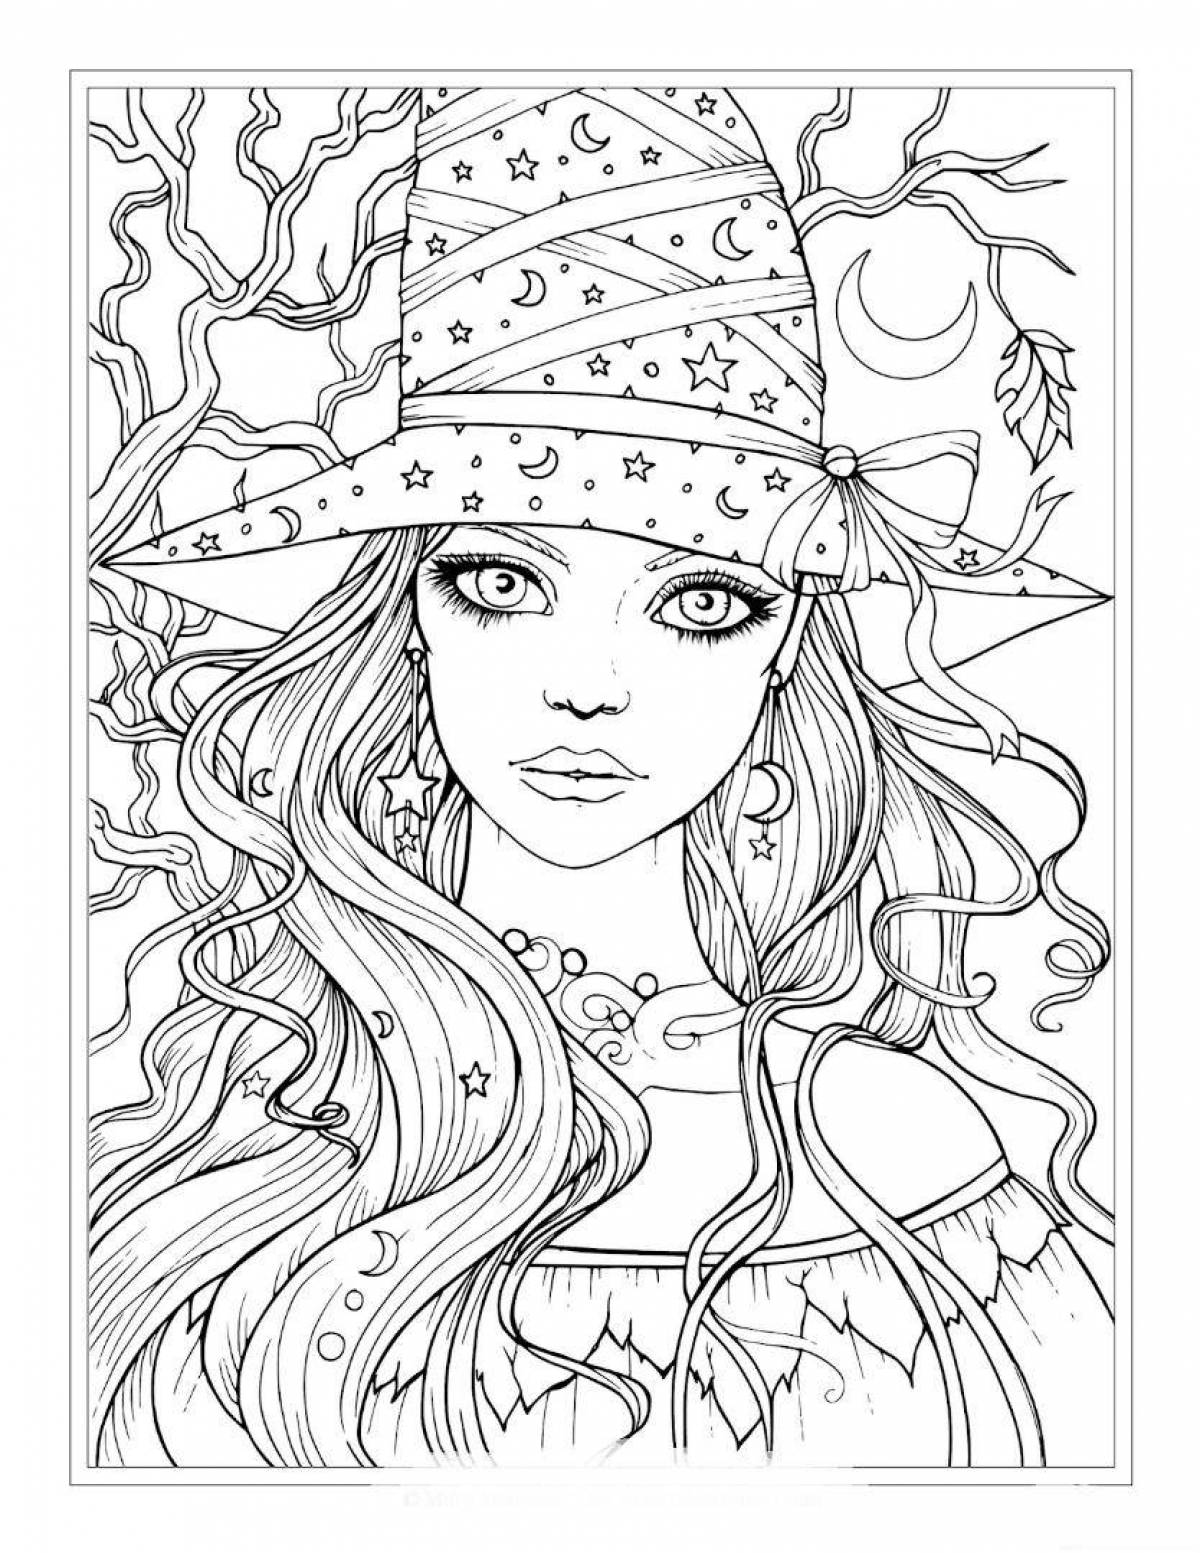 Refreshing modern coloring book for adults